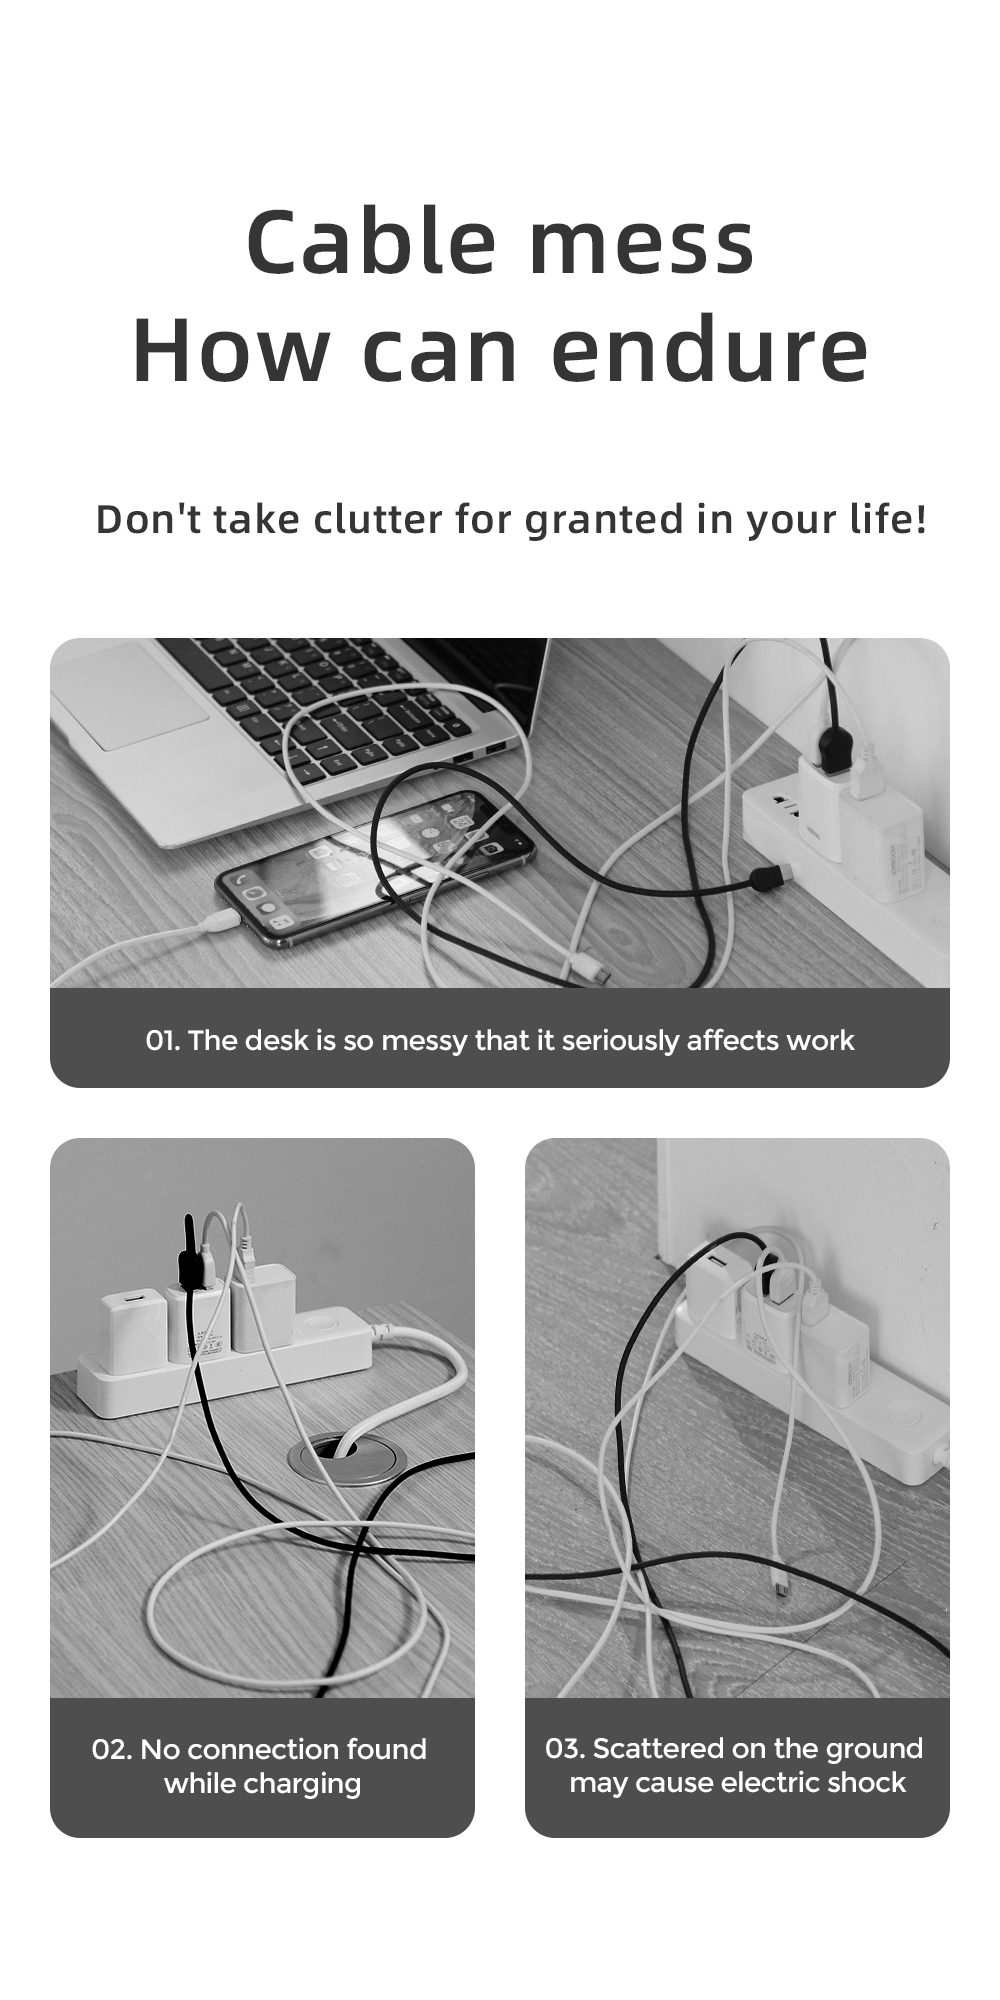 Cables-Cable-Clips-Cord-Organizer-Cord-Holder-4-Pack-Cable-Management-Desk-Cable-Cord-Organizer-for-Home-Office-Charger-Power-Cord-Computer-Car-Chord-Bedsi-5